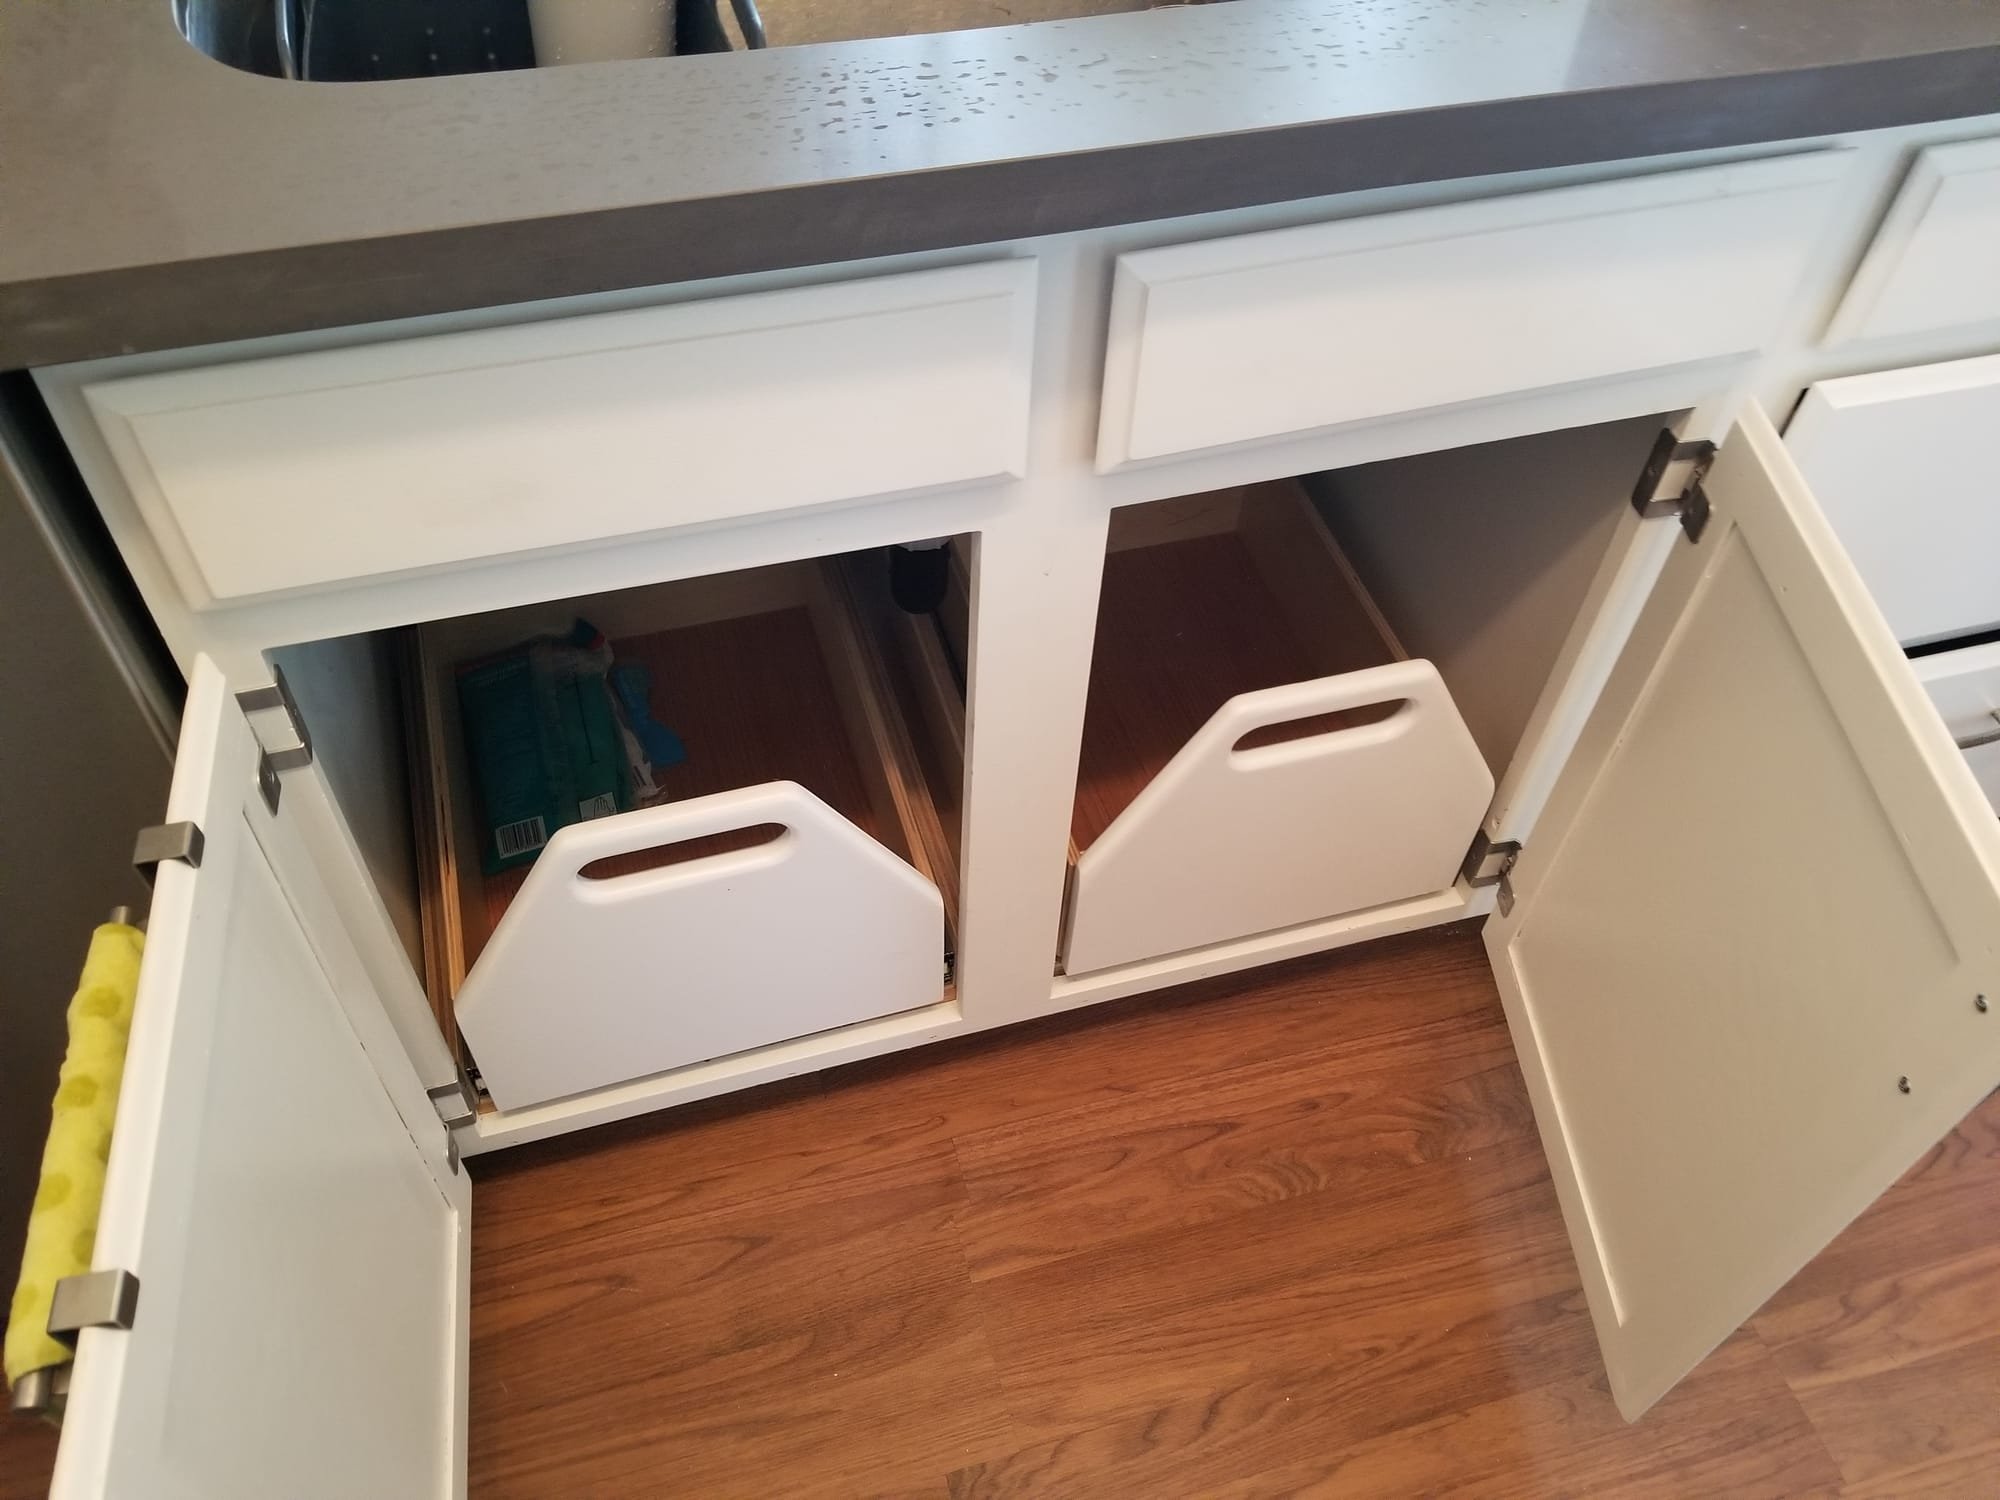 Added taller drawer fronts so you don't have to bend over